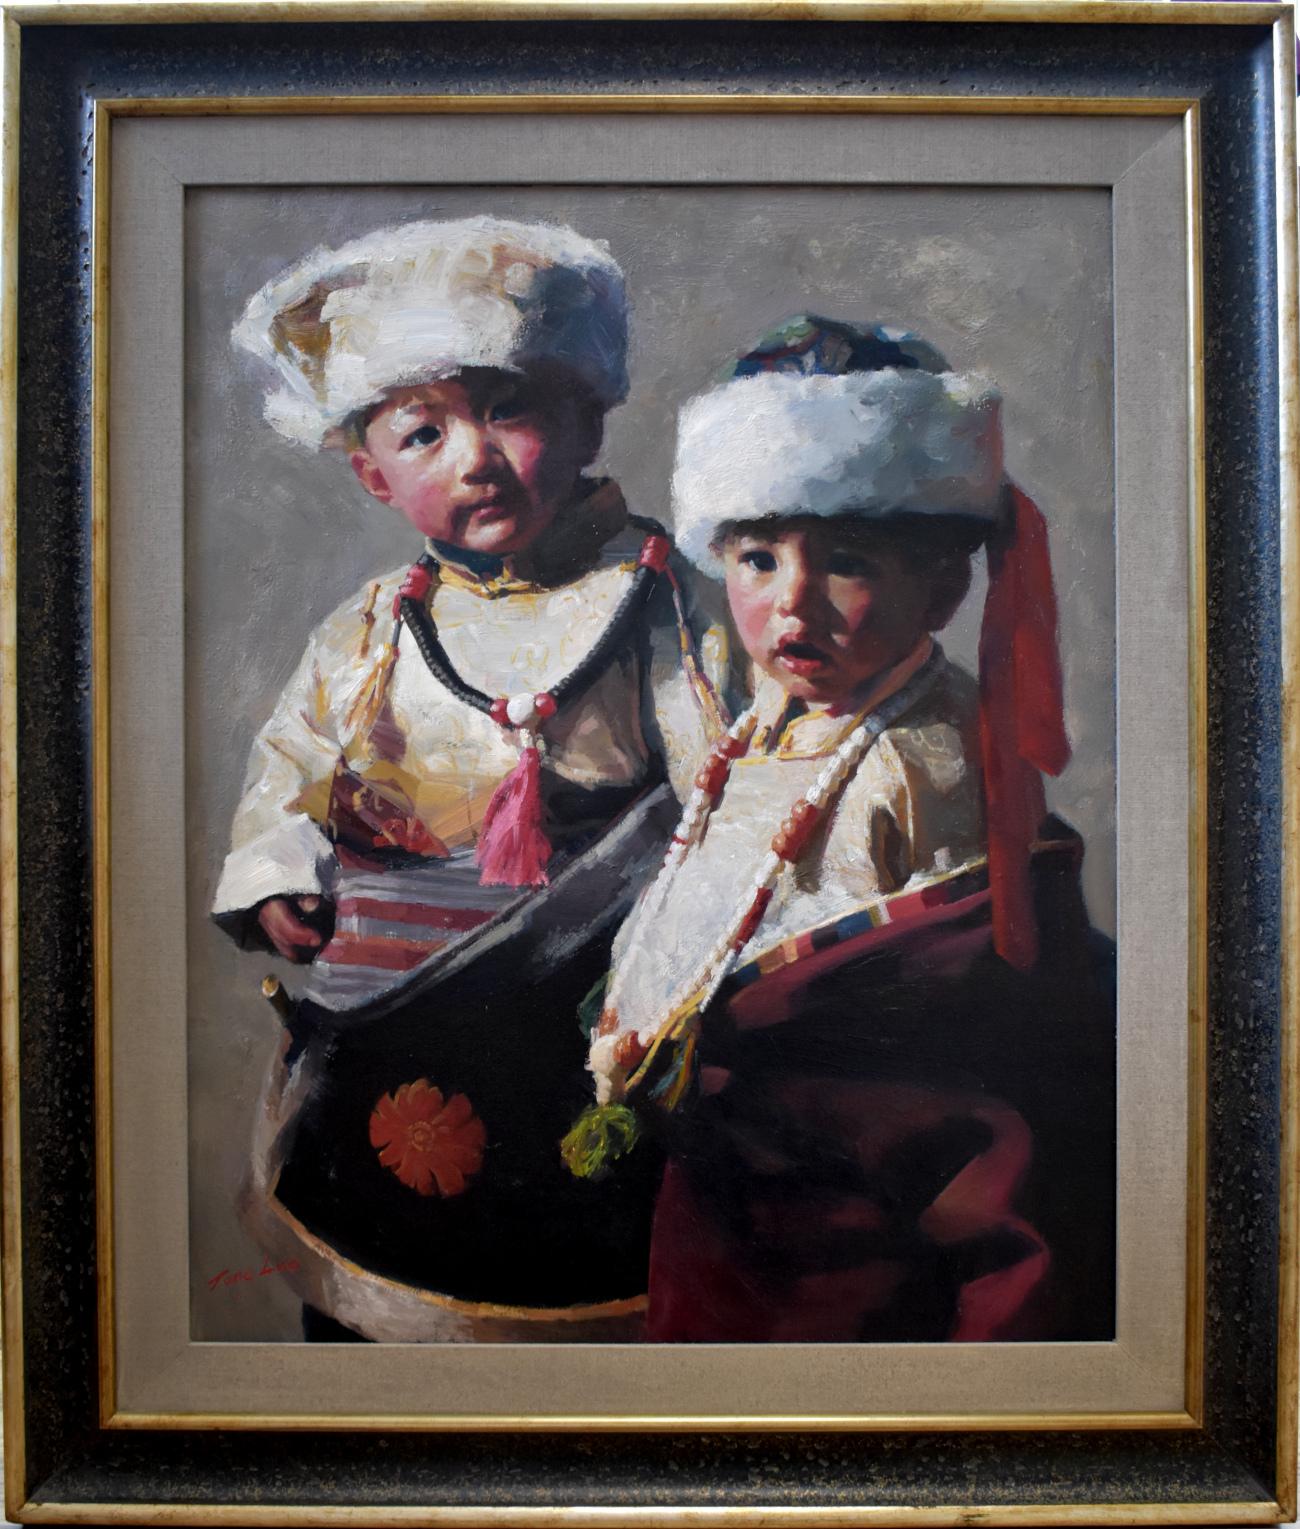 Tong Luo Figurative Painting - "Two Boys" CHINESE YOUNG BOYS.  ADORABLE